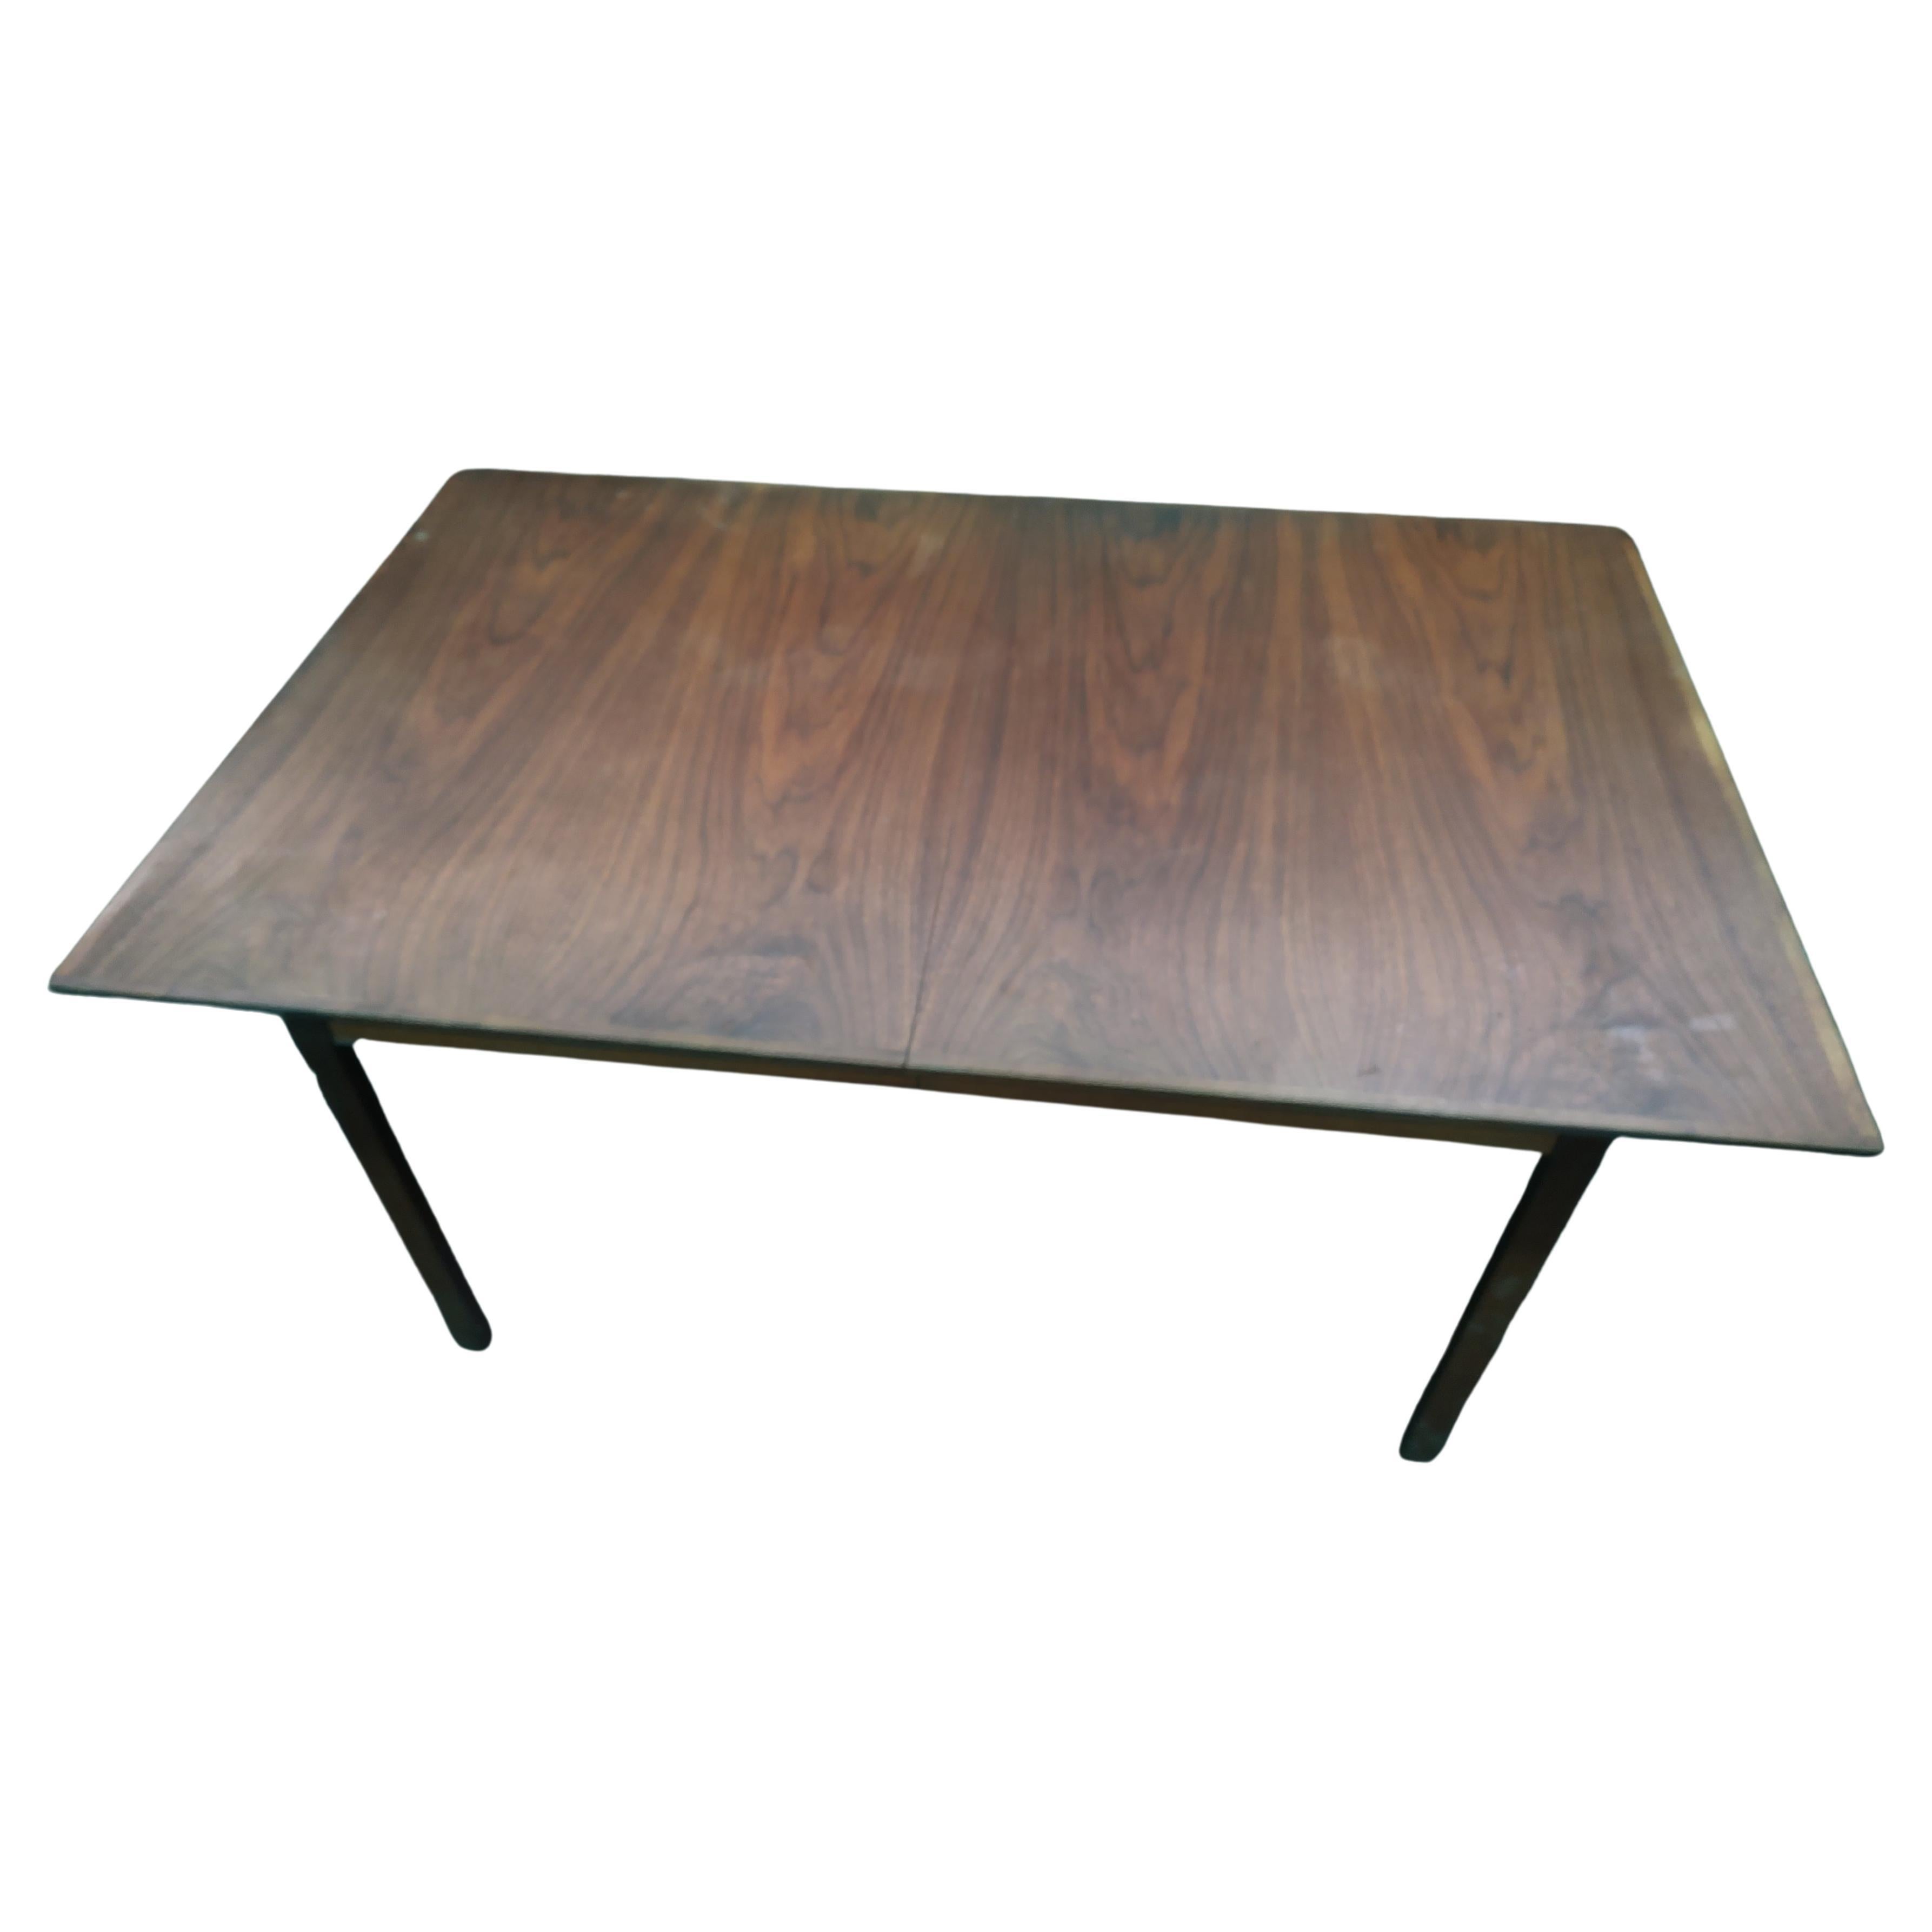 Mid Century Modern Walnut Extension Dining Room Table  In Good Condition For Sale In Port Jervis, NY